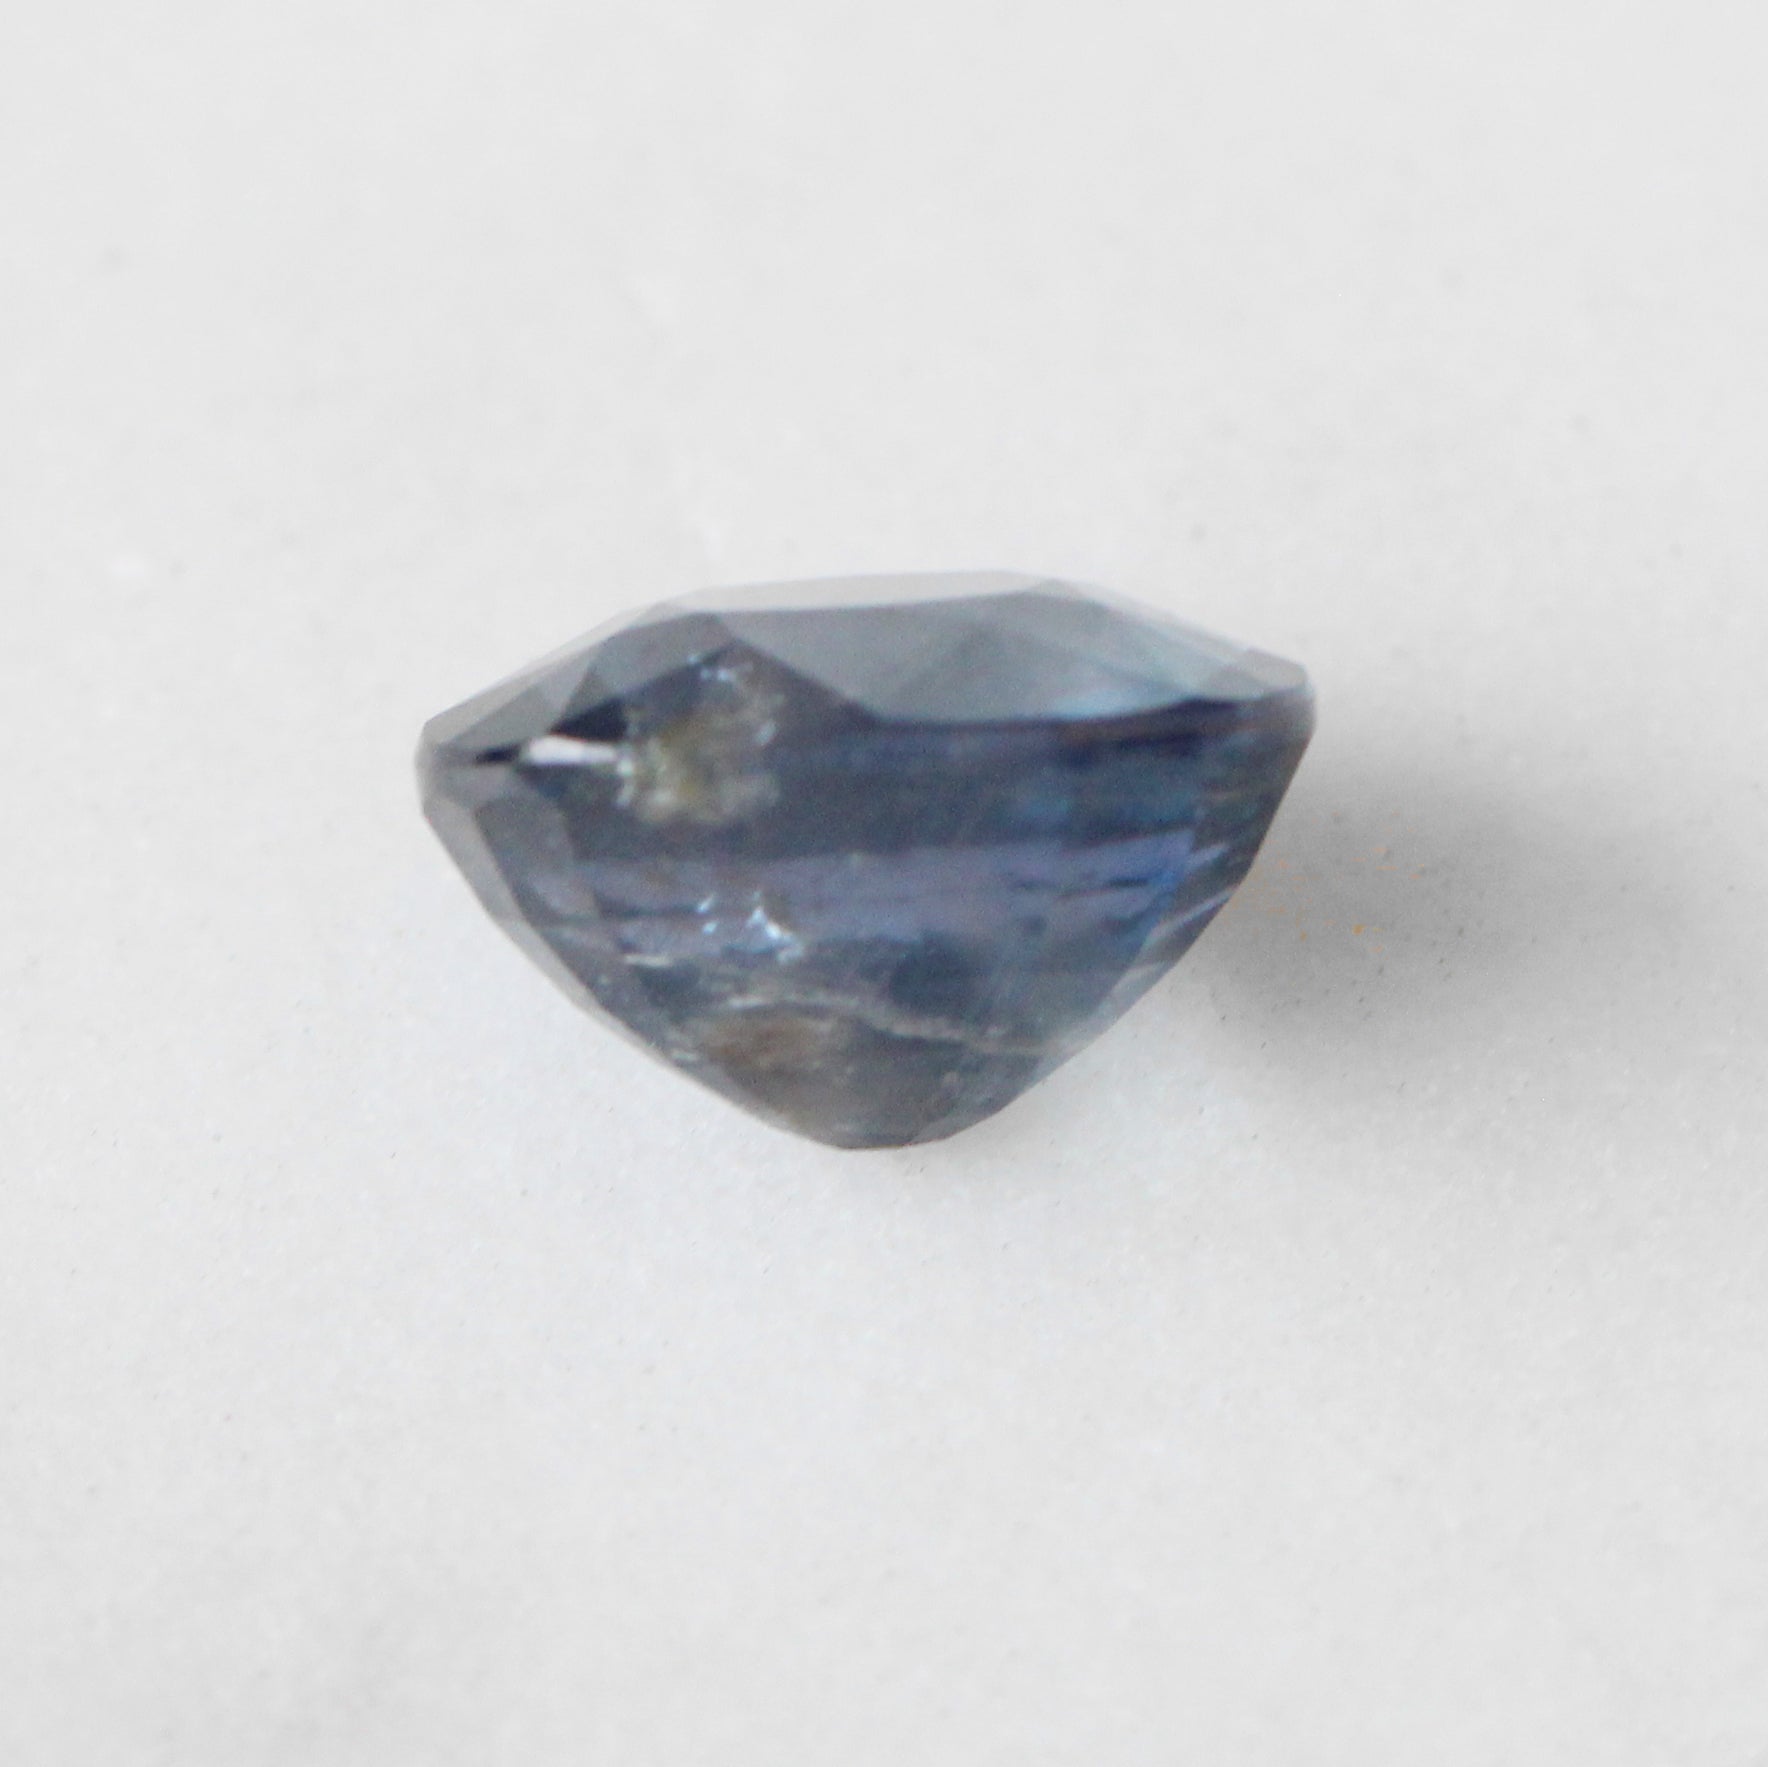 8.79 Carat Oval Sapphire for Custom Work - Inventory Code OBSAP879 - Midwinter Co. Alternative Bridal Rings and Modern Fine Jewelry